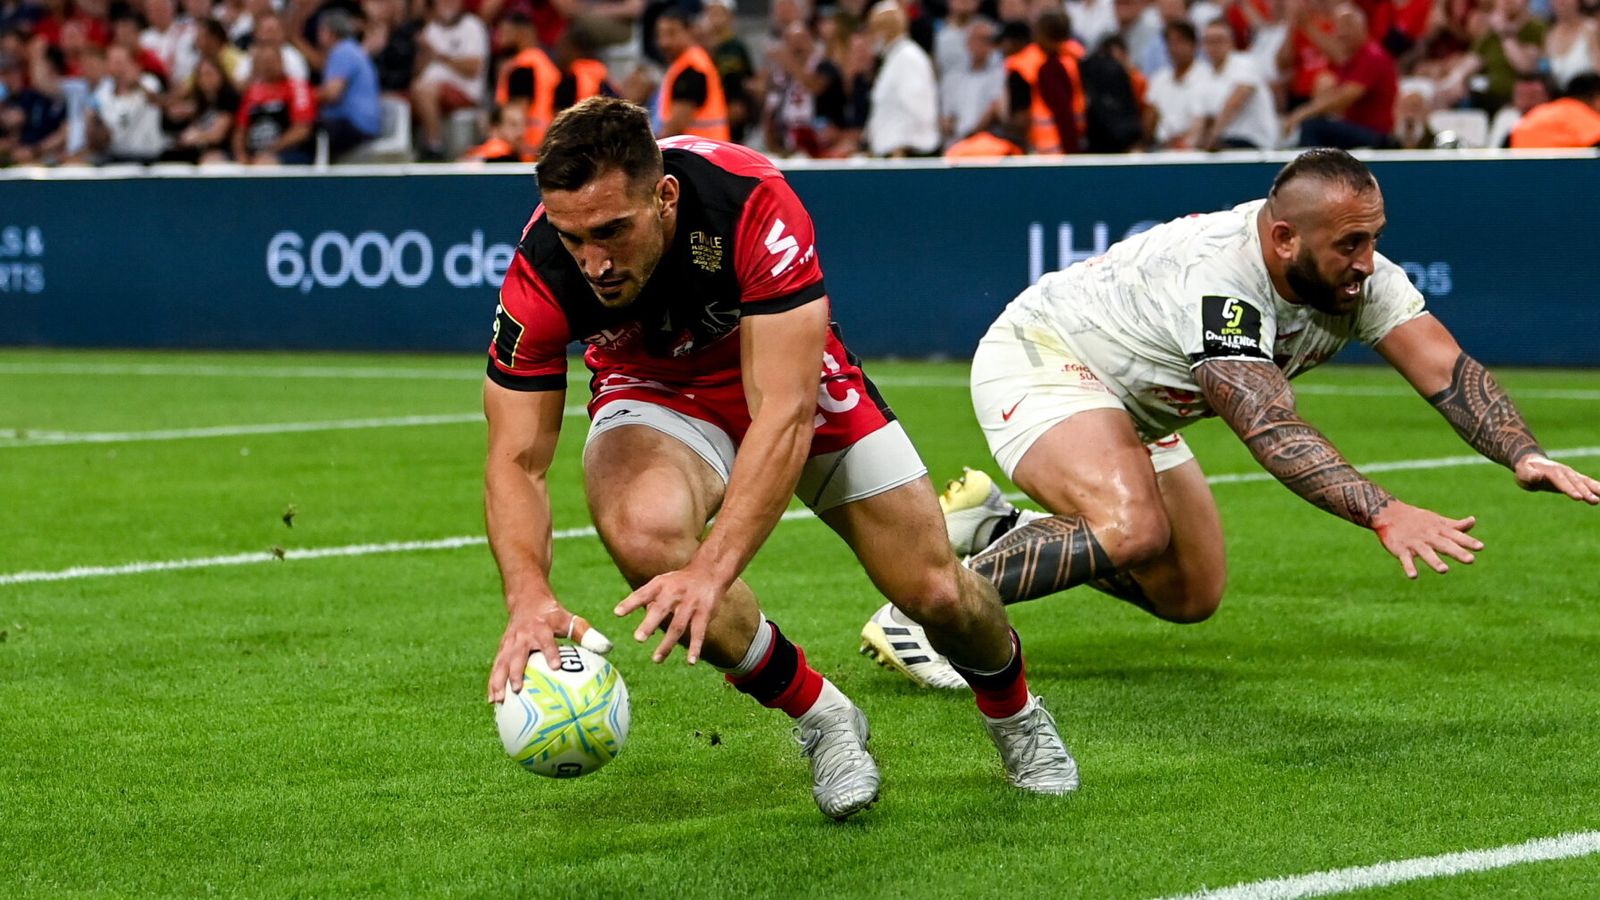 Lyon 30-12 Toulon: Lyon claim Challenge Cup final victory in first major honour since 1933